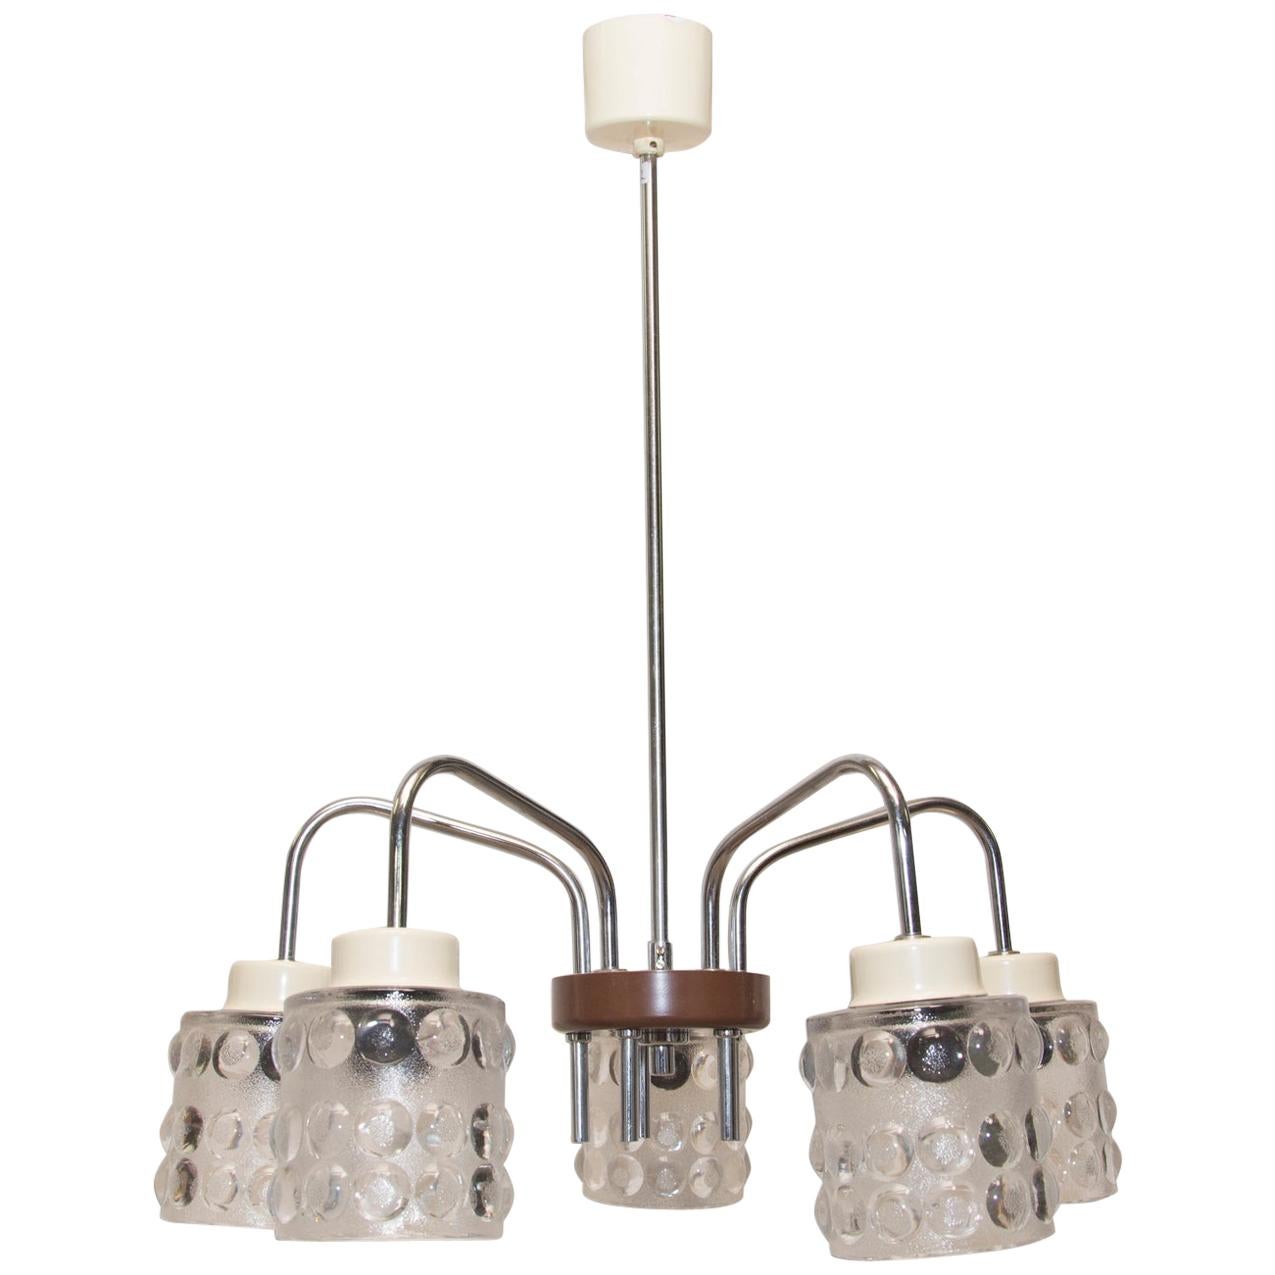 Midcentury Pendant with Five Cut-Glass Lampshades, Lidokov, 1960s